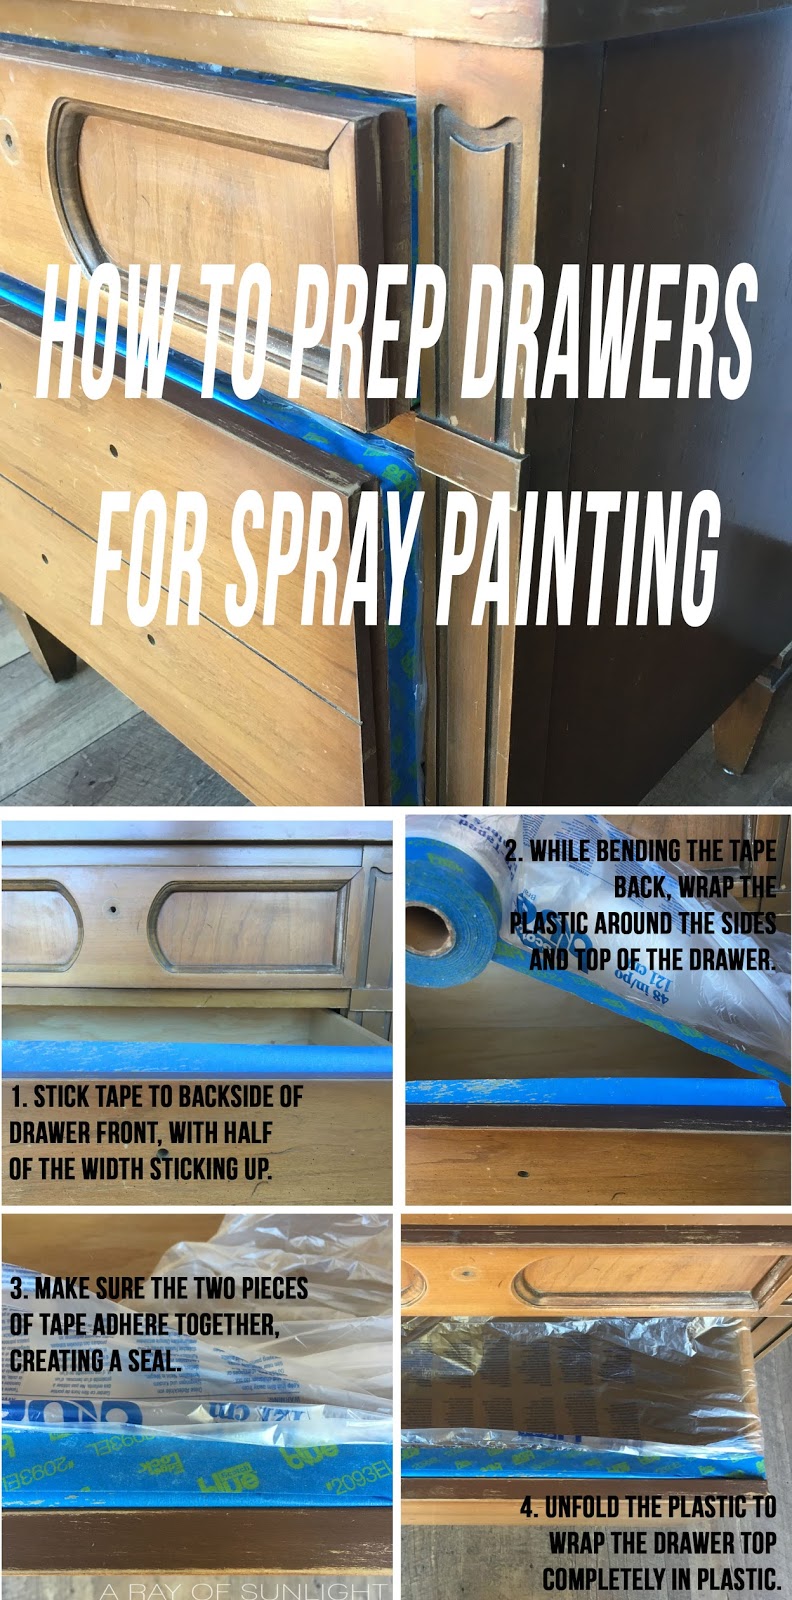 How to prep furniture for paint by taping off furniture